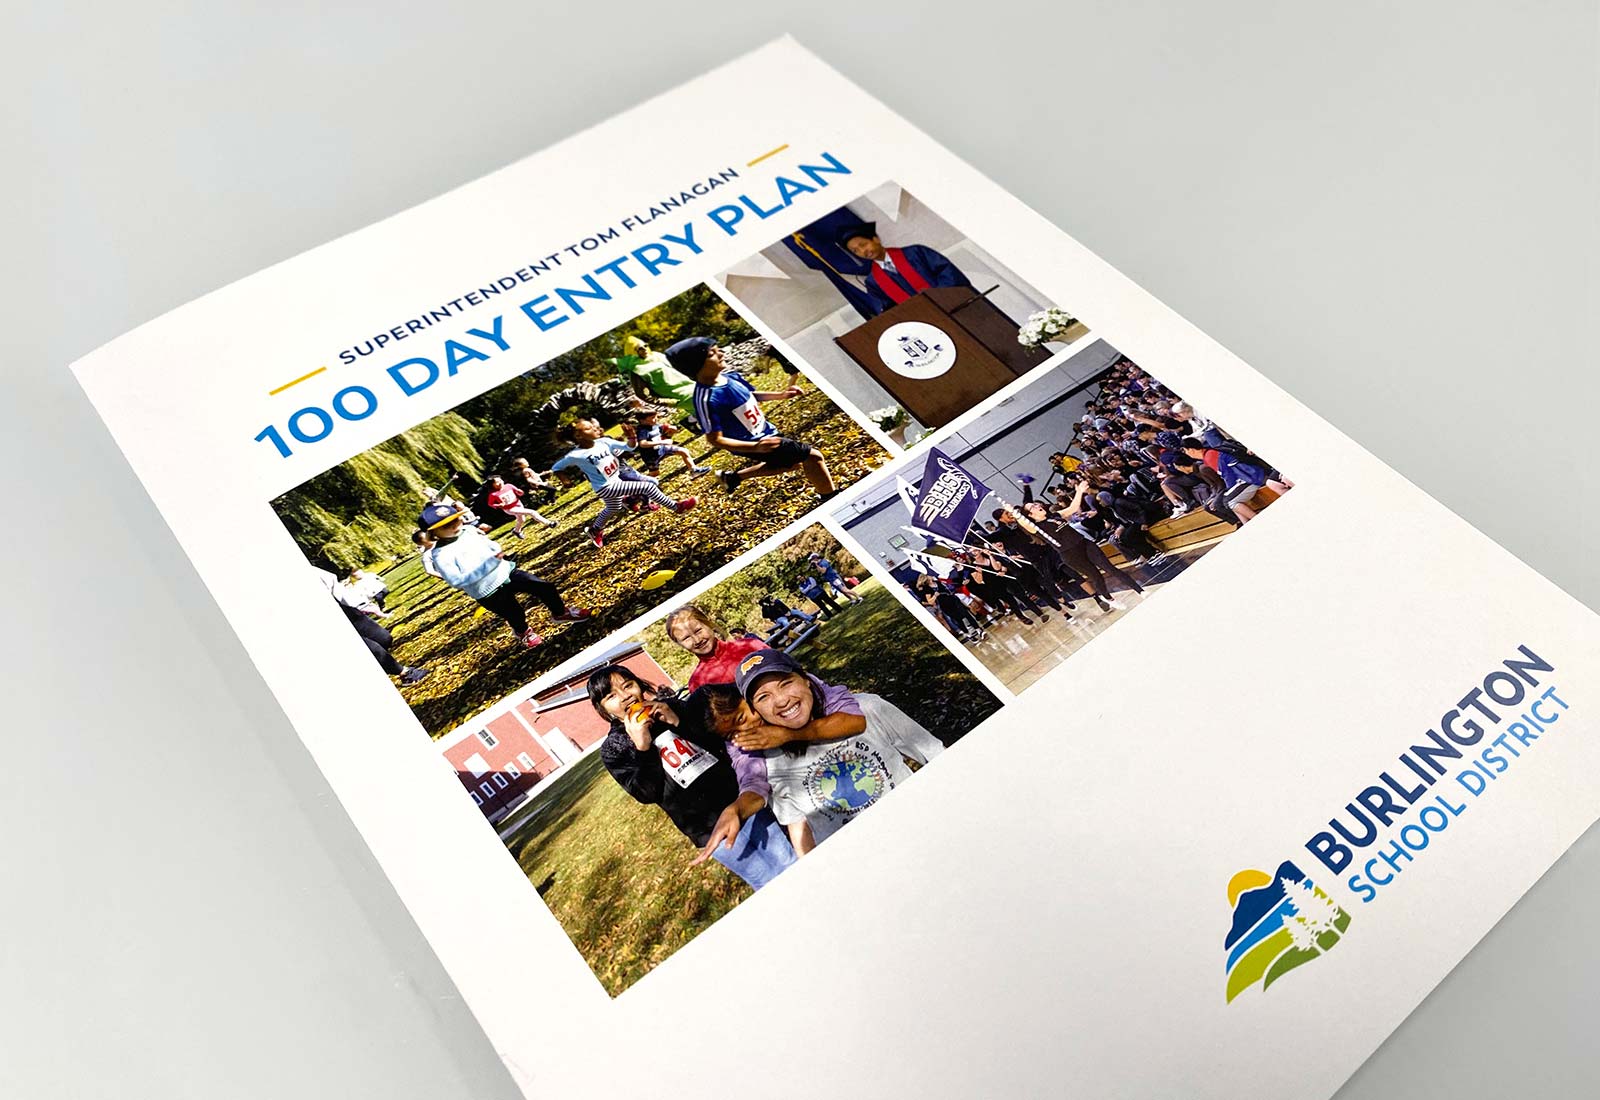 Burlington school district cover of 100 day entry plan booklet